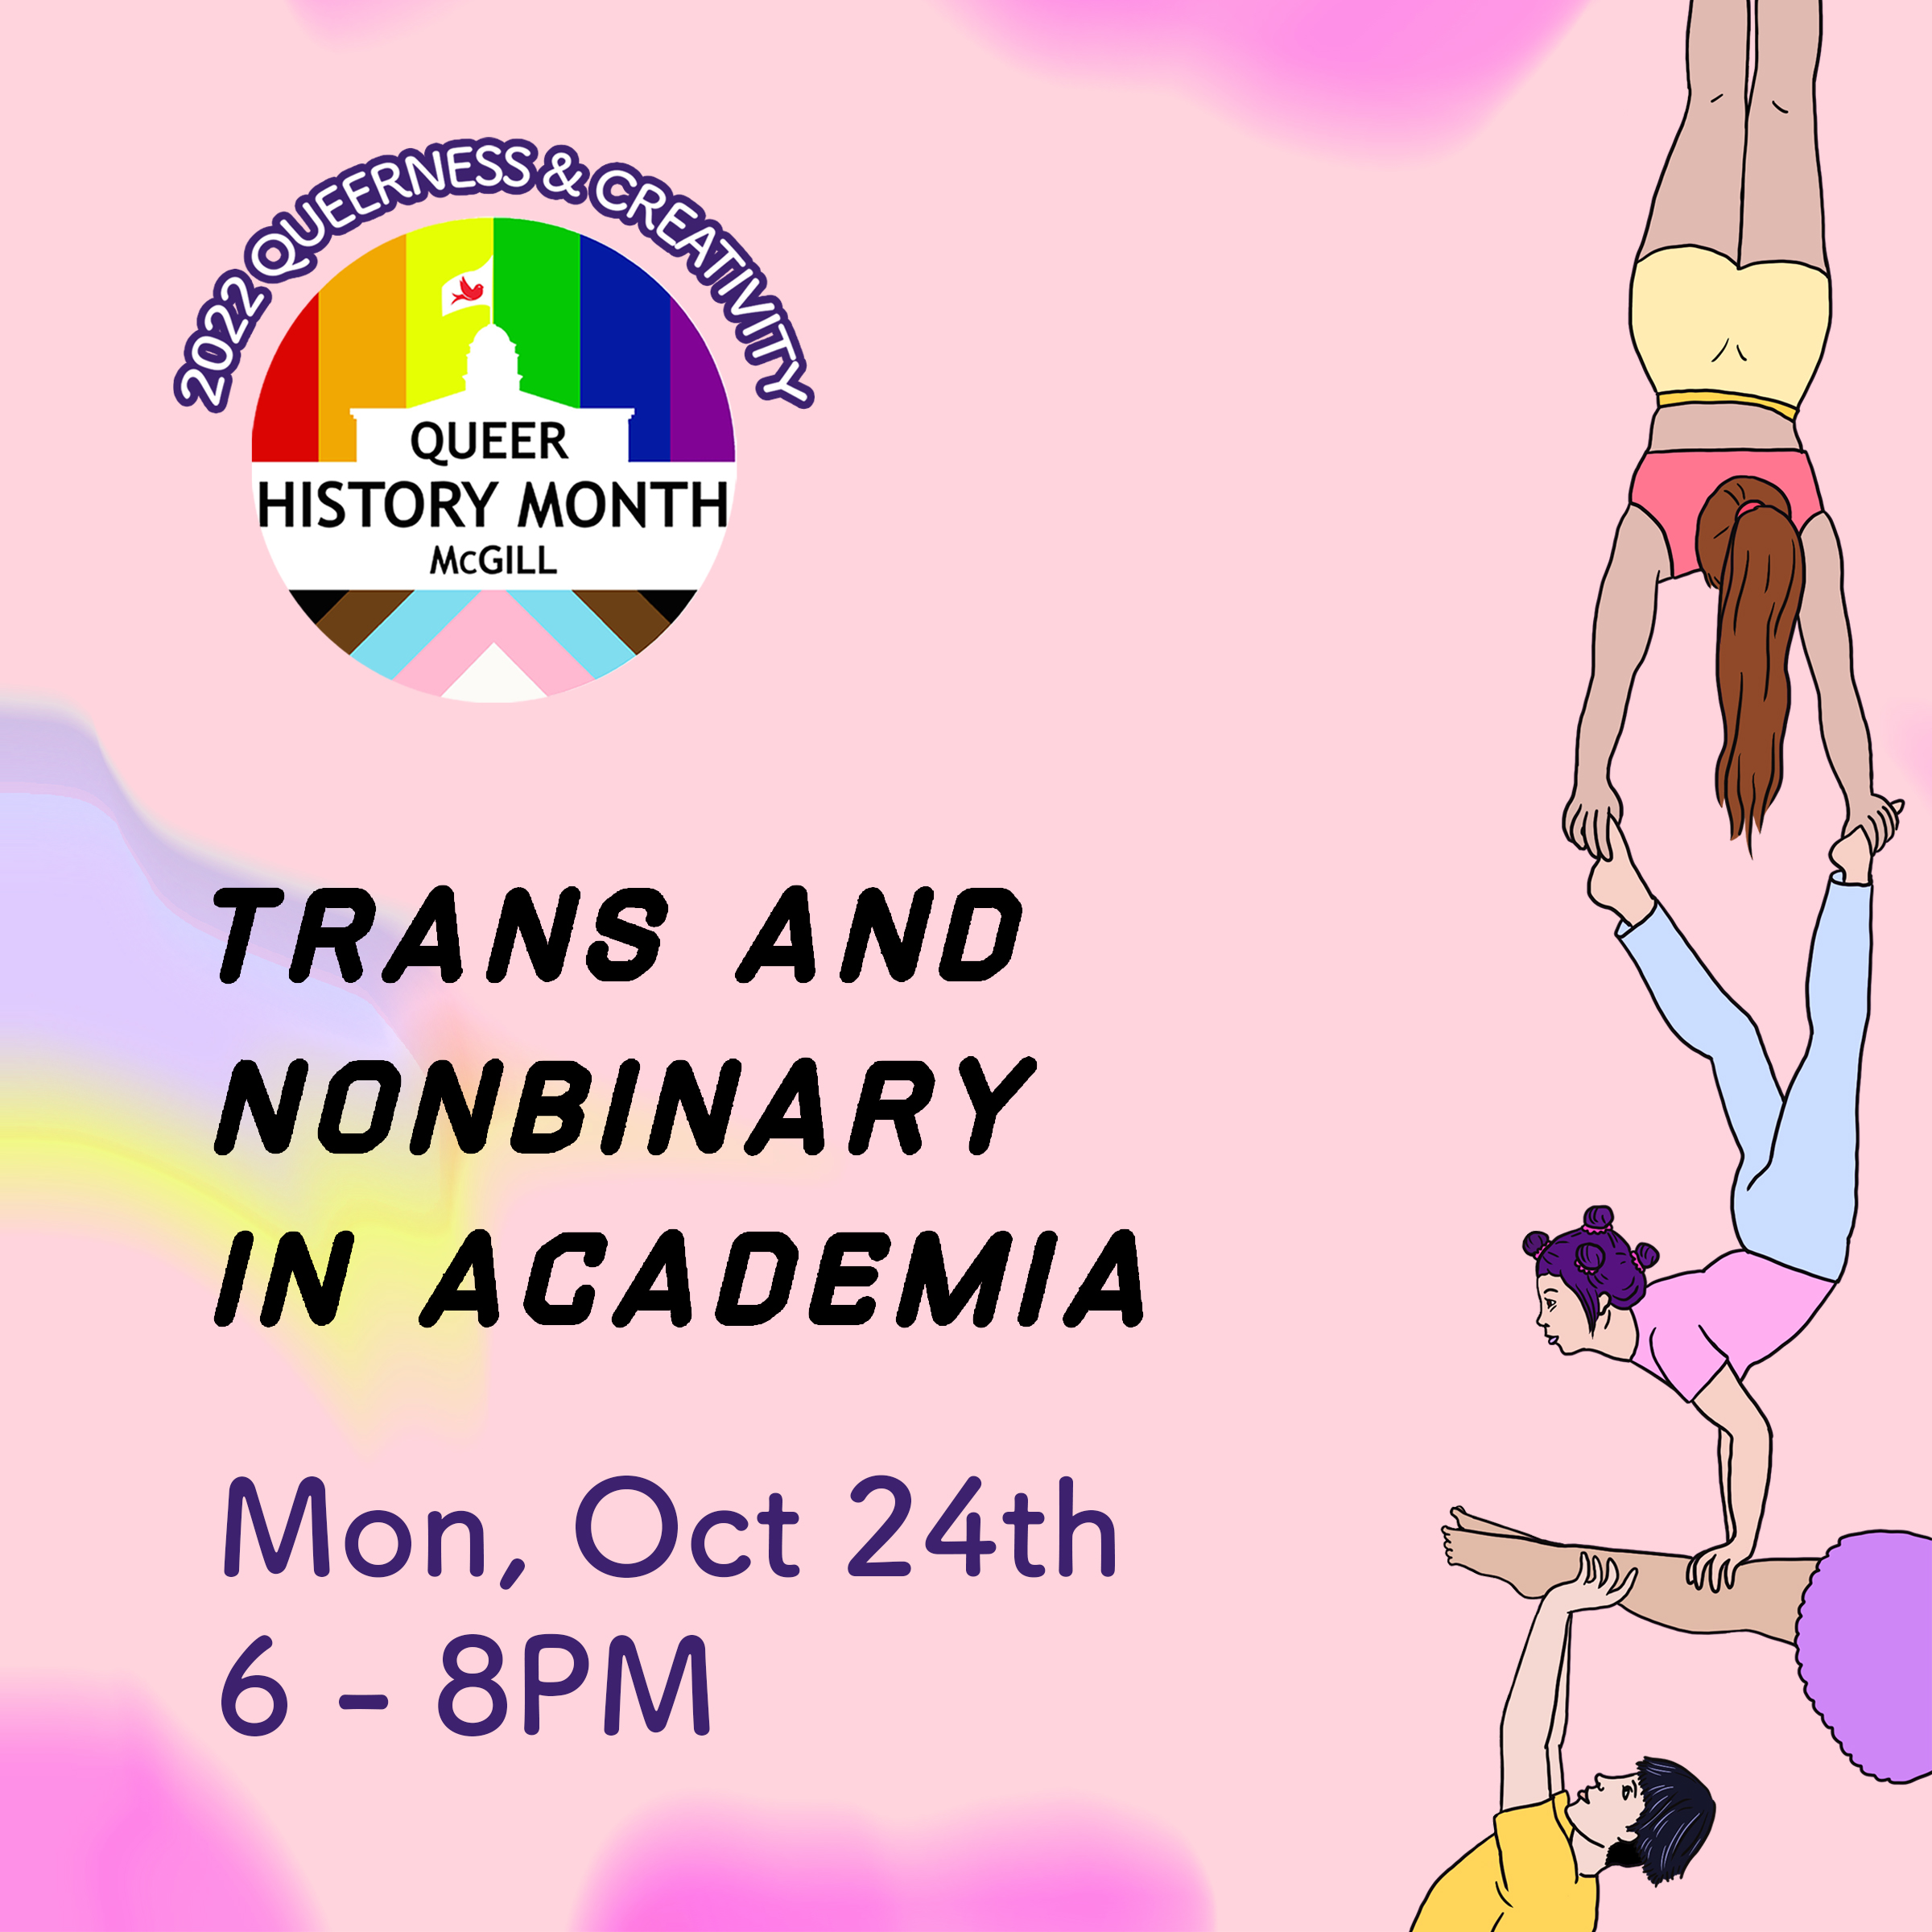 Trans and non-binary in academia event ad with three circus performers and date and time of event Mon Oct 24th 6-8 pm with McGill Queer History Month logo all against a purple background